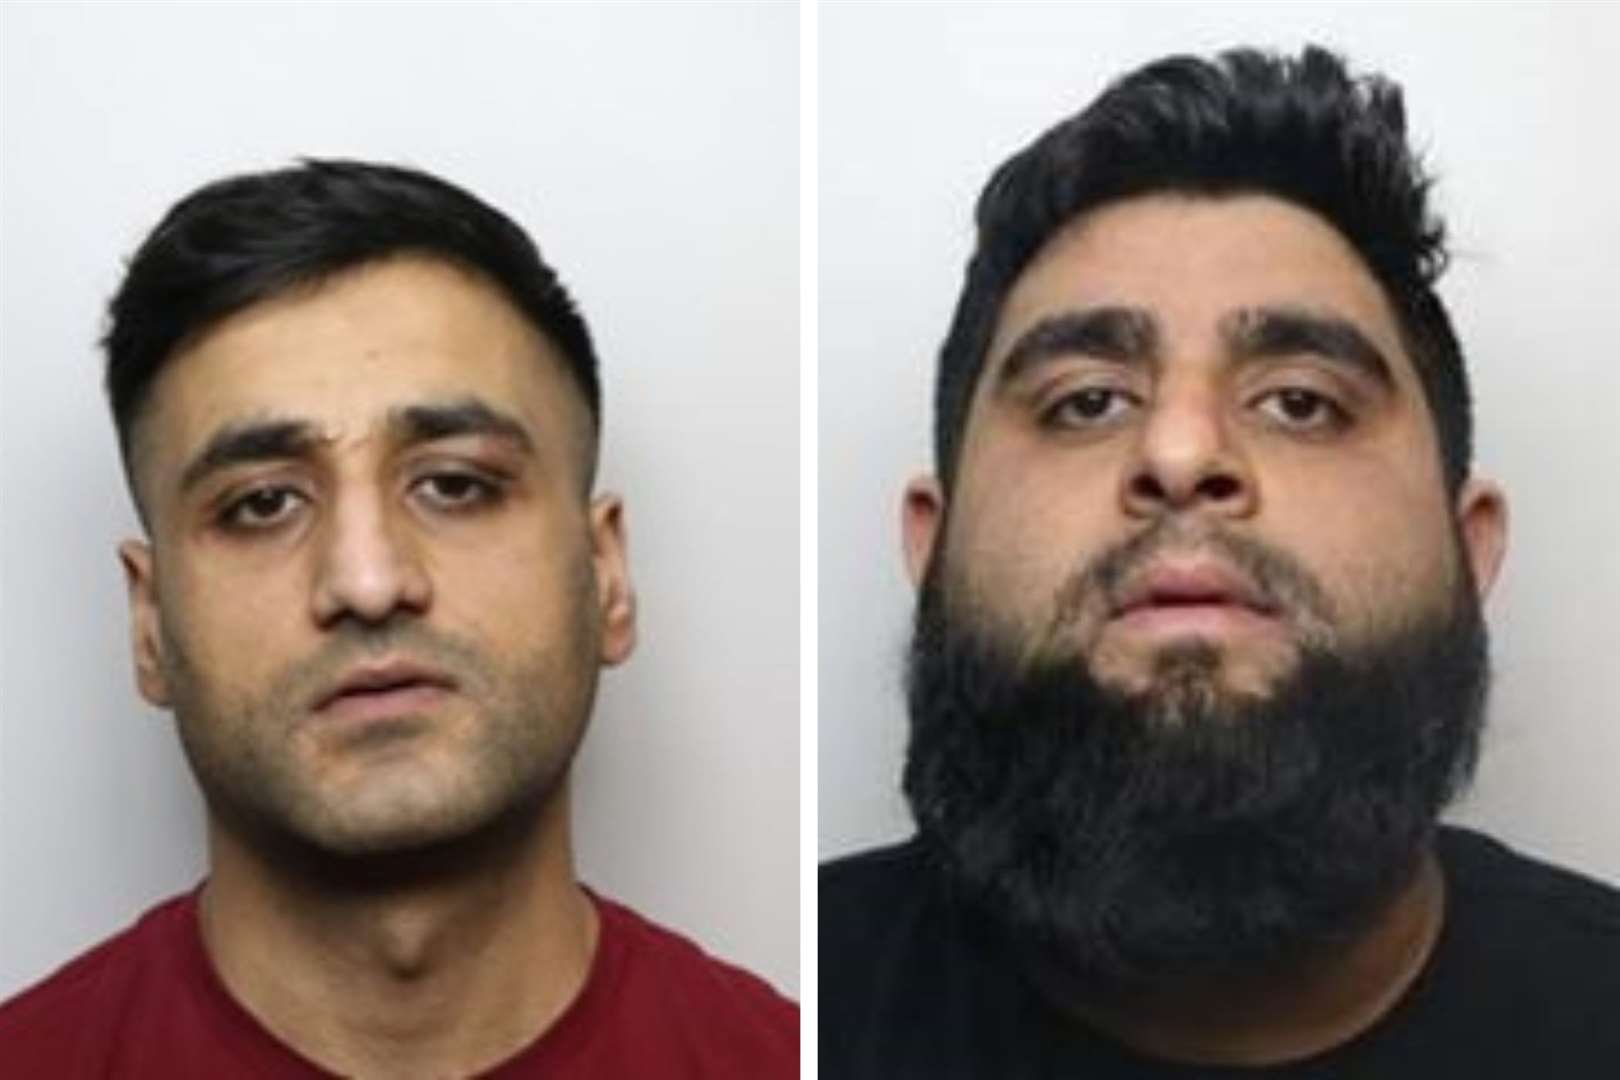 Ijaz Khan and Amir Khan are wanted in connection with drug offences (46695342)